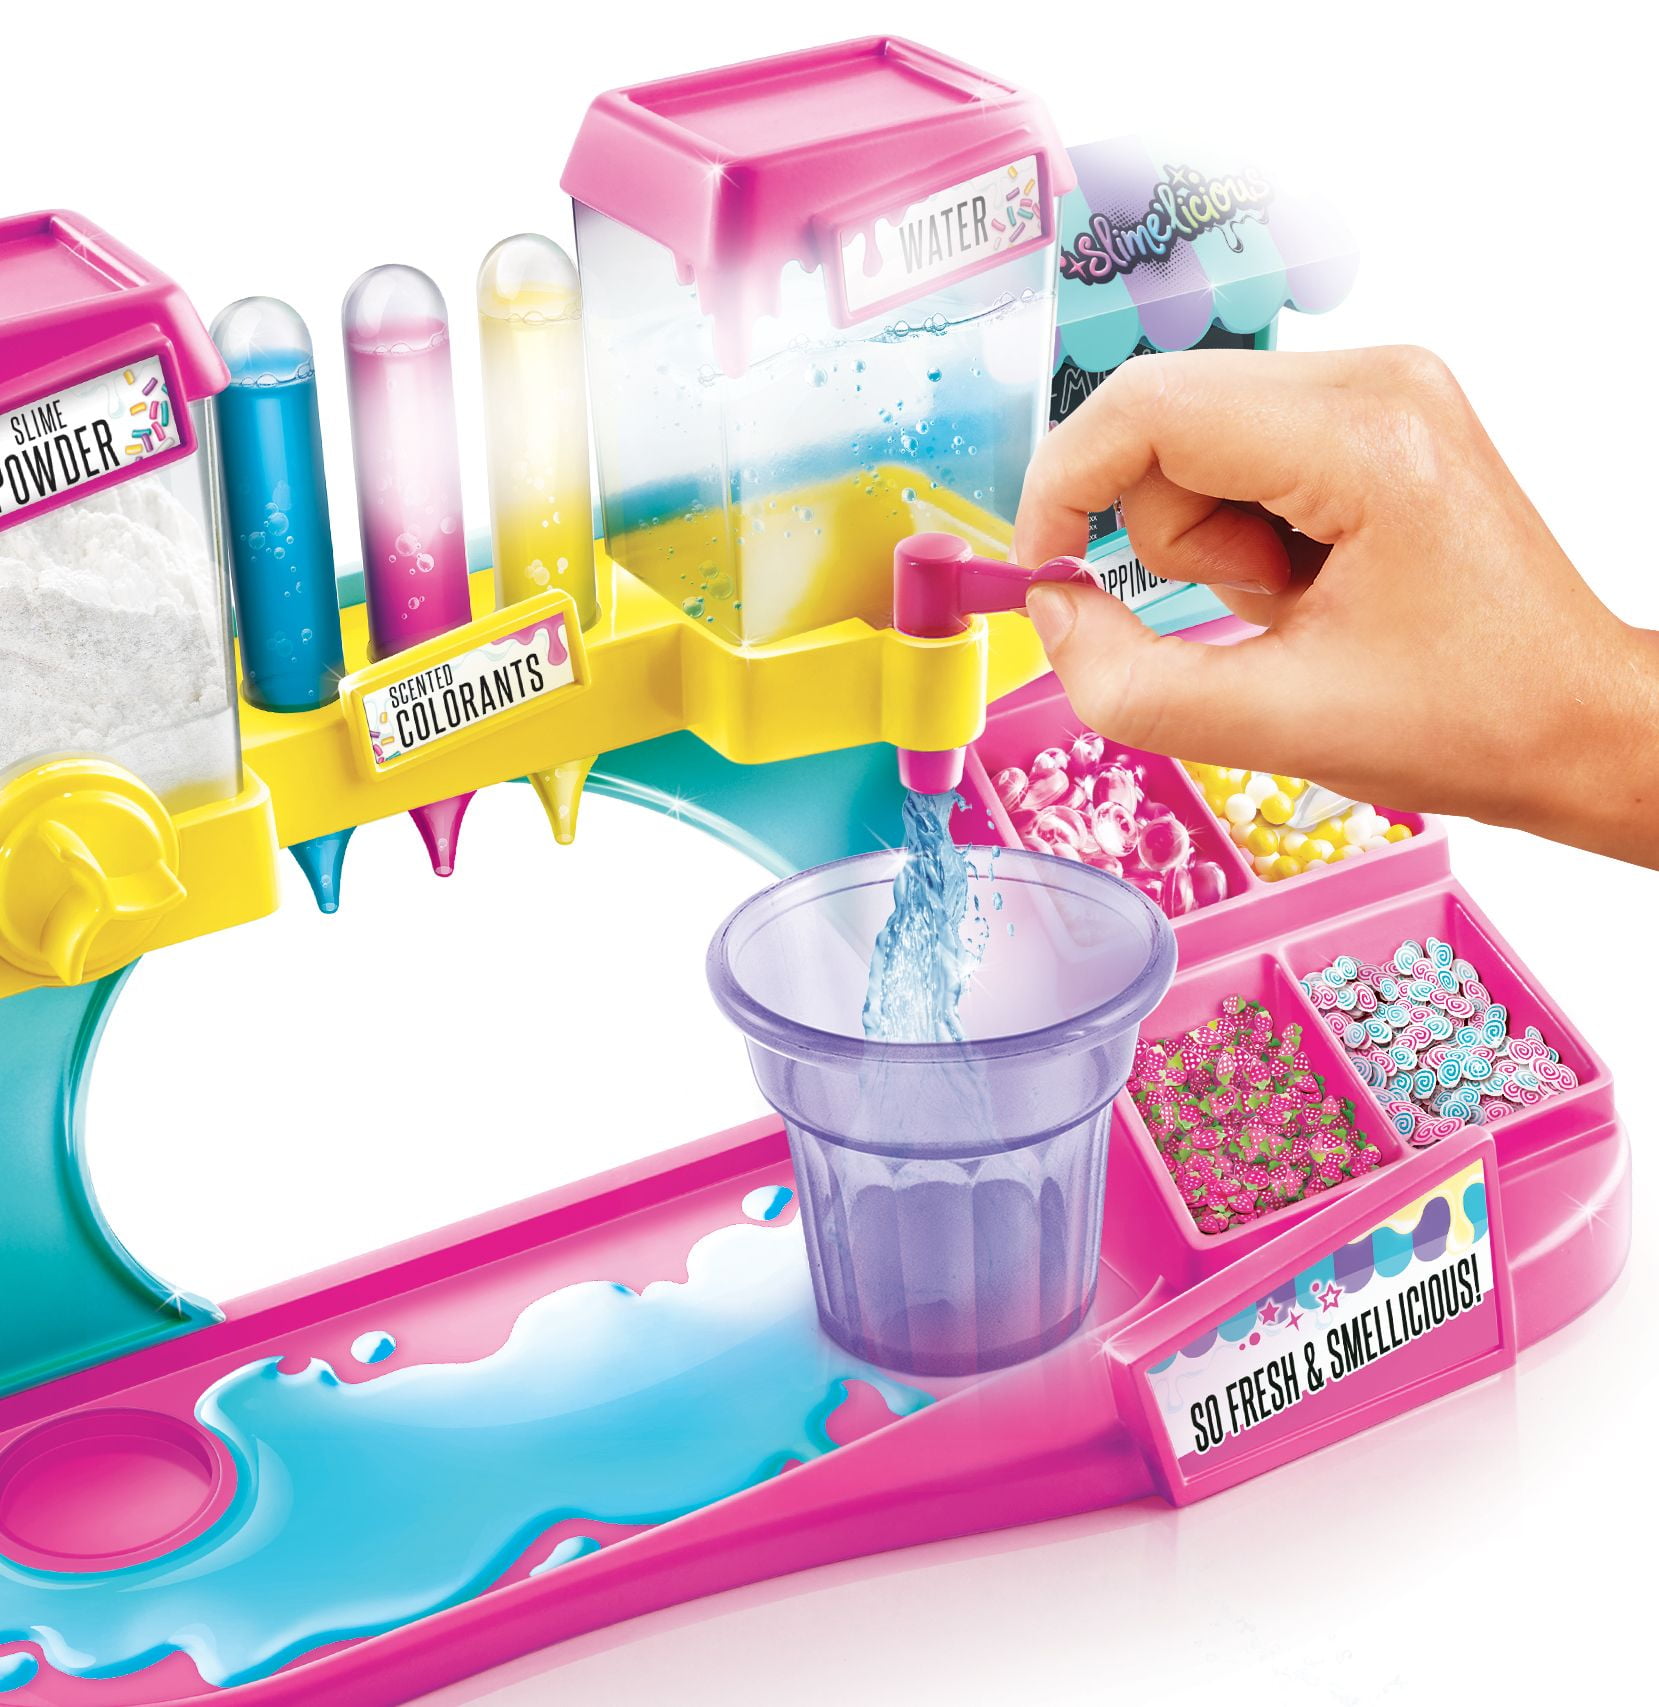 CANAL TOYS Slime 'licious 3 shakers diy - Refresh